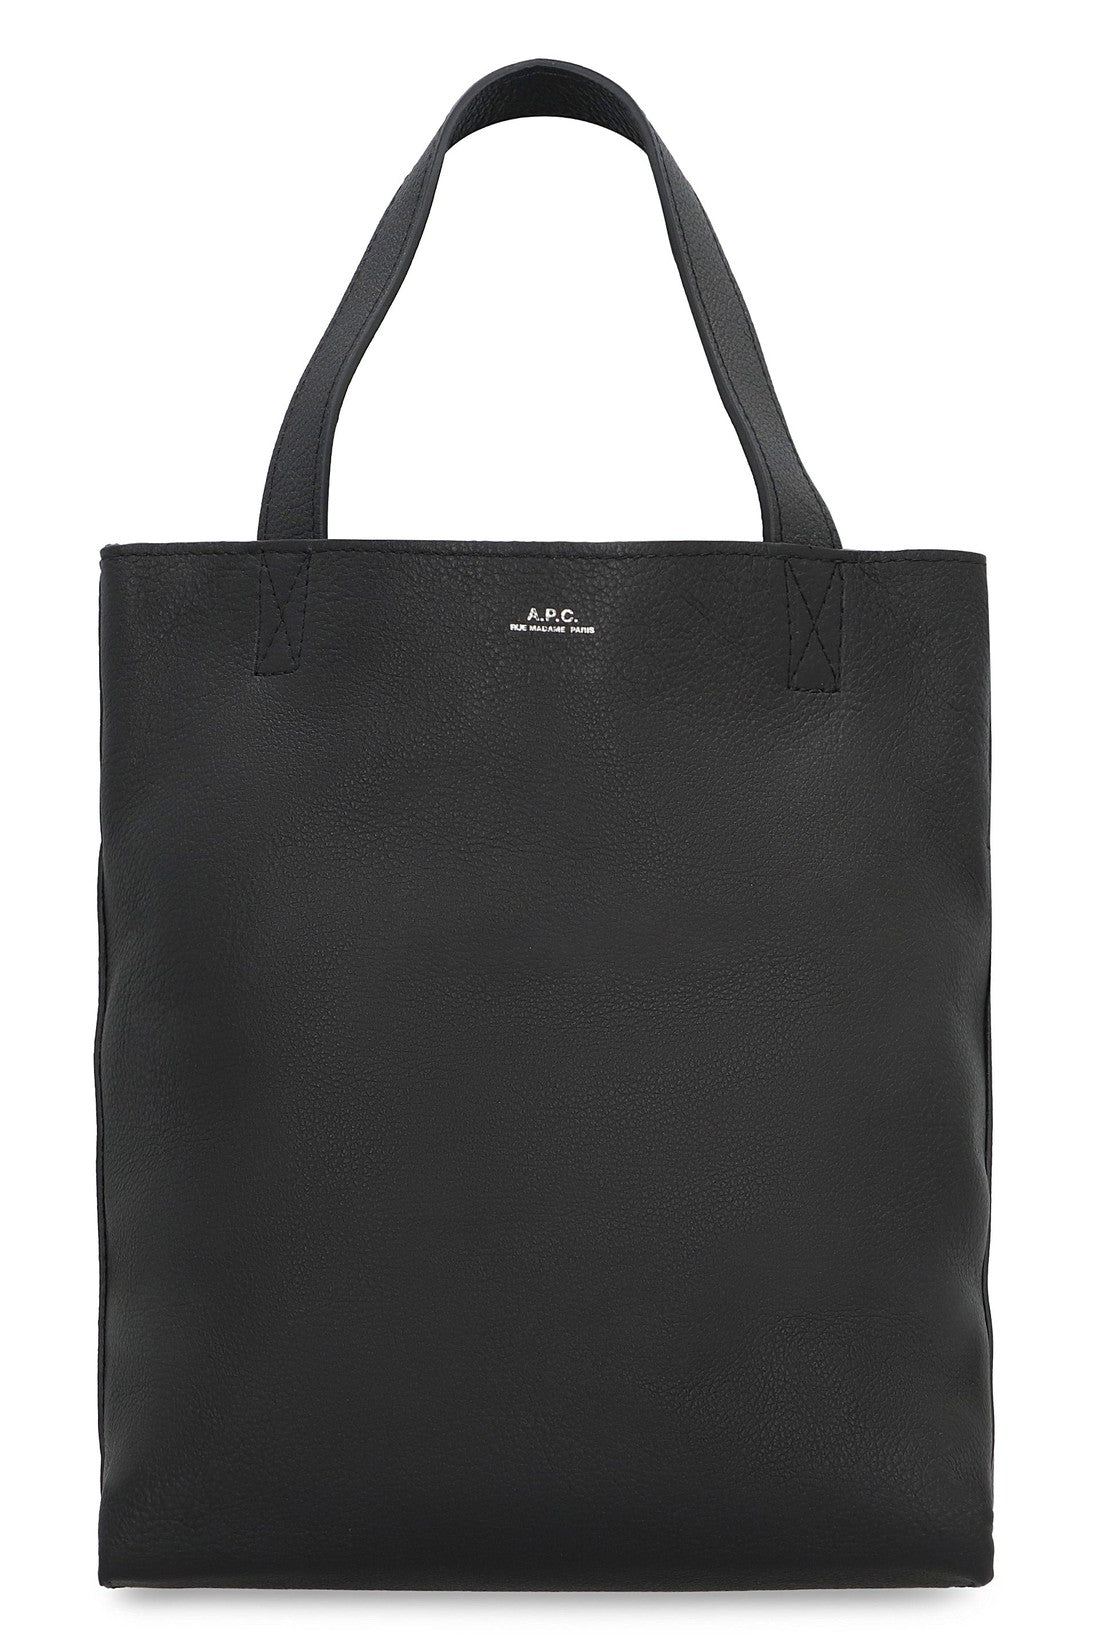 A.P.C.-OUTLET-SALE-Maiko leather tote-ARCHIVIST